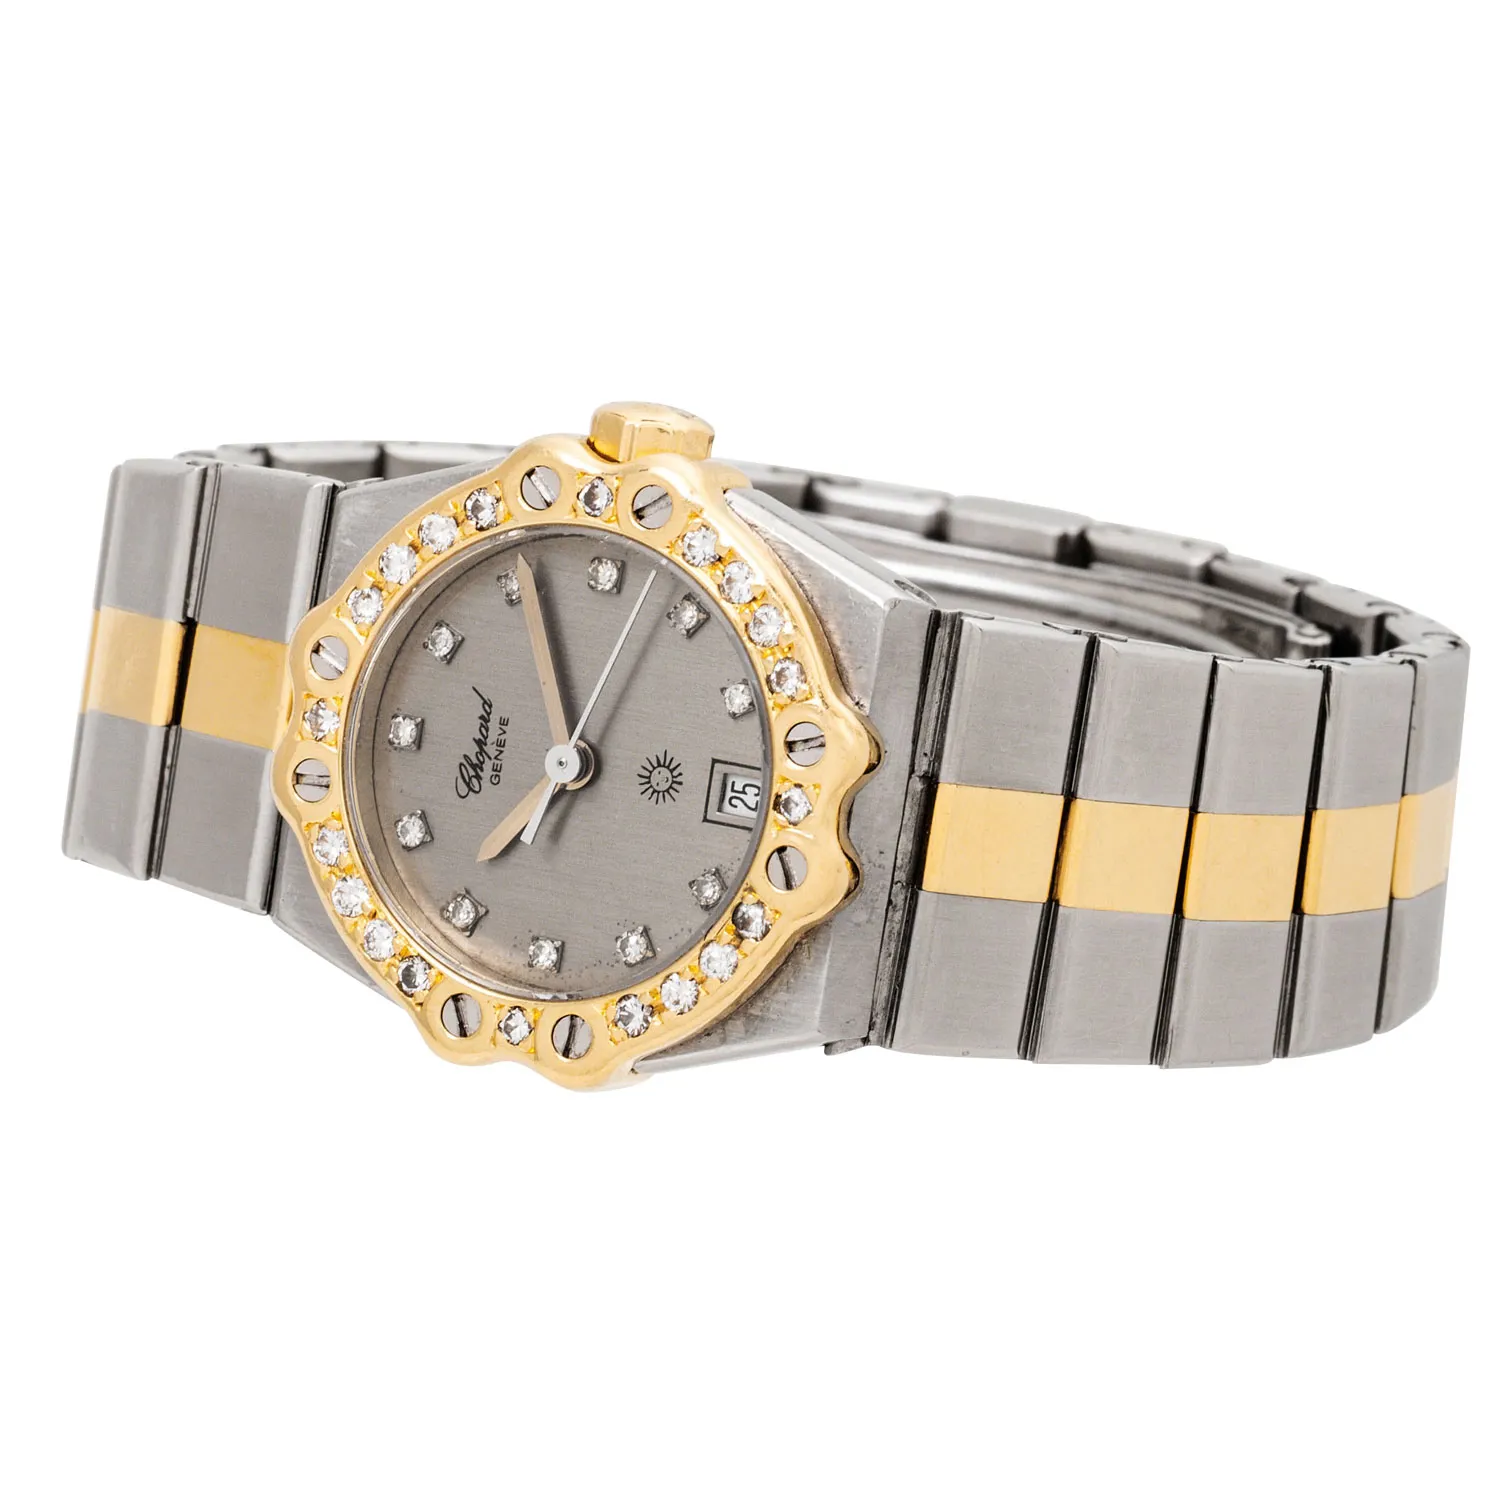 Chopard St. Moritz 8024 25mm Yellow gold and stainless steel Gray 5